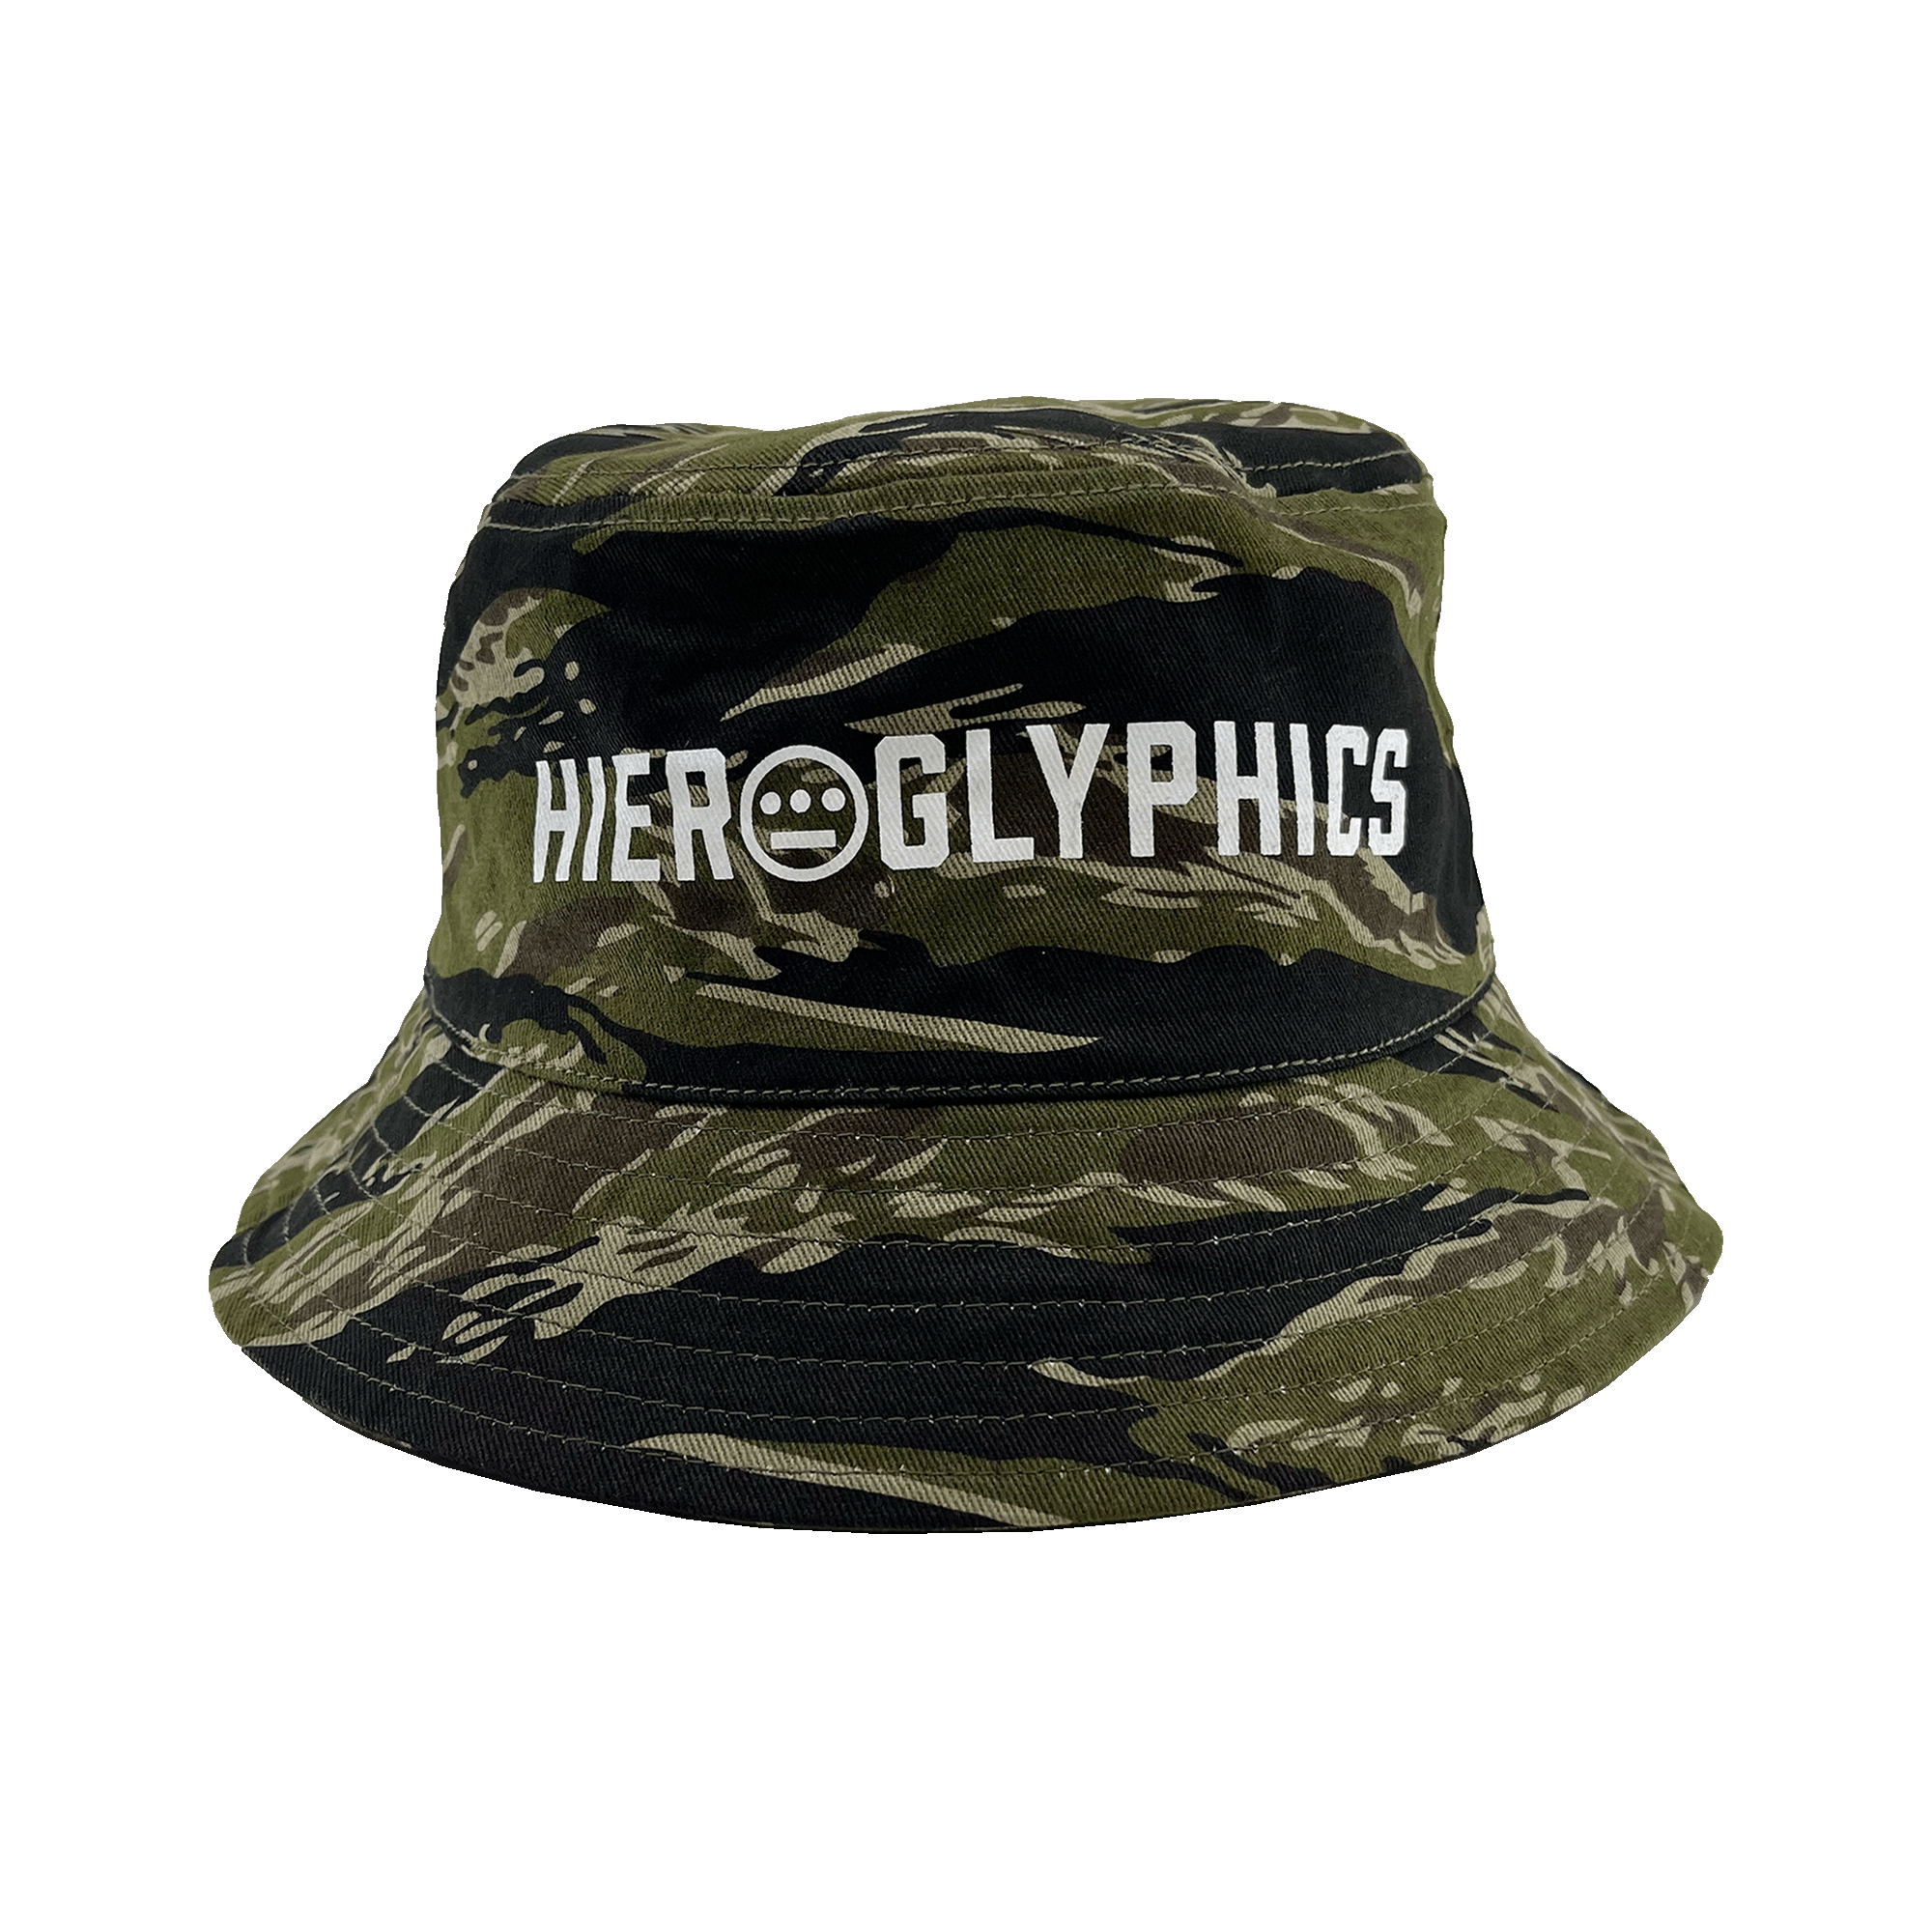 Green camouflage bucket hat with a large white Hieroglyphics Hip Hop Crew wordmark with logo on the front crown. 